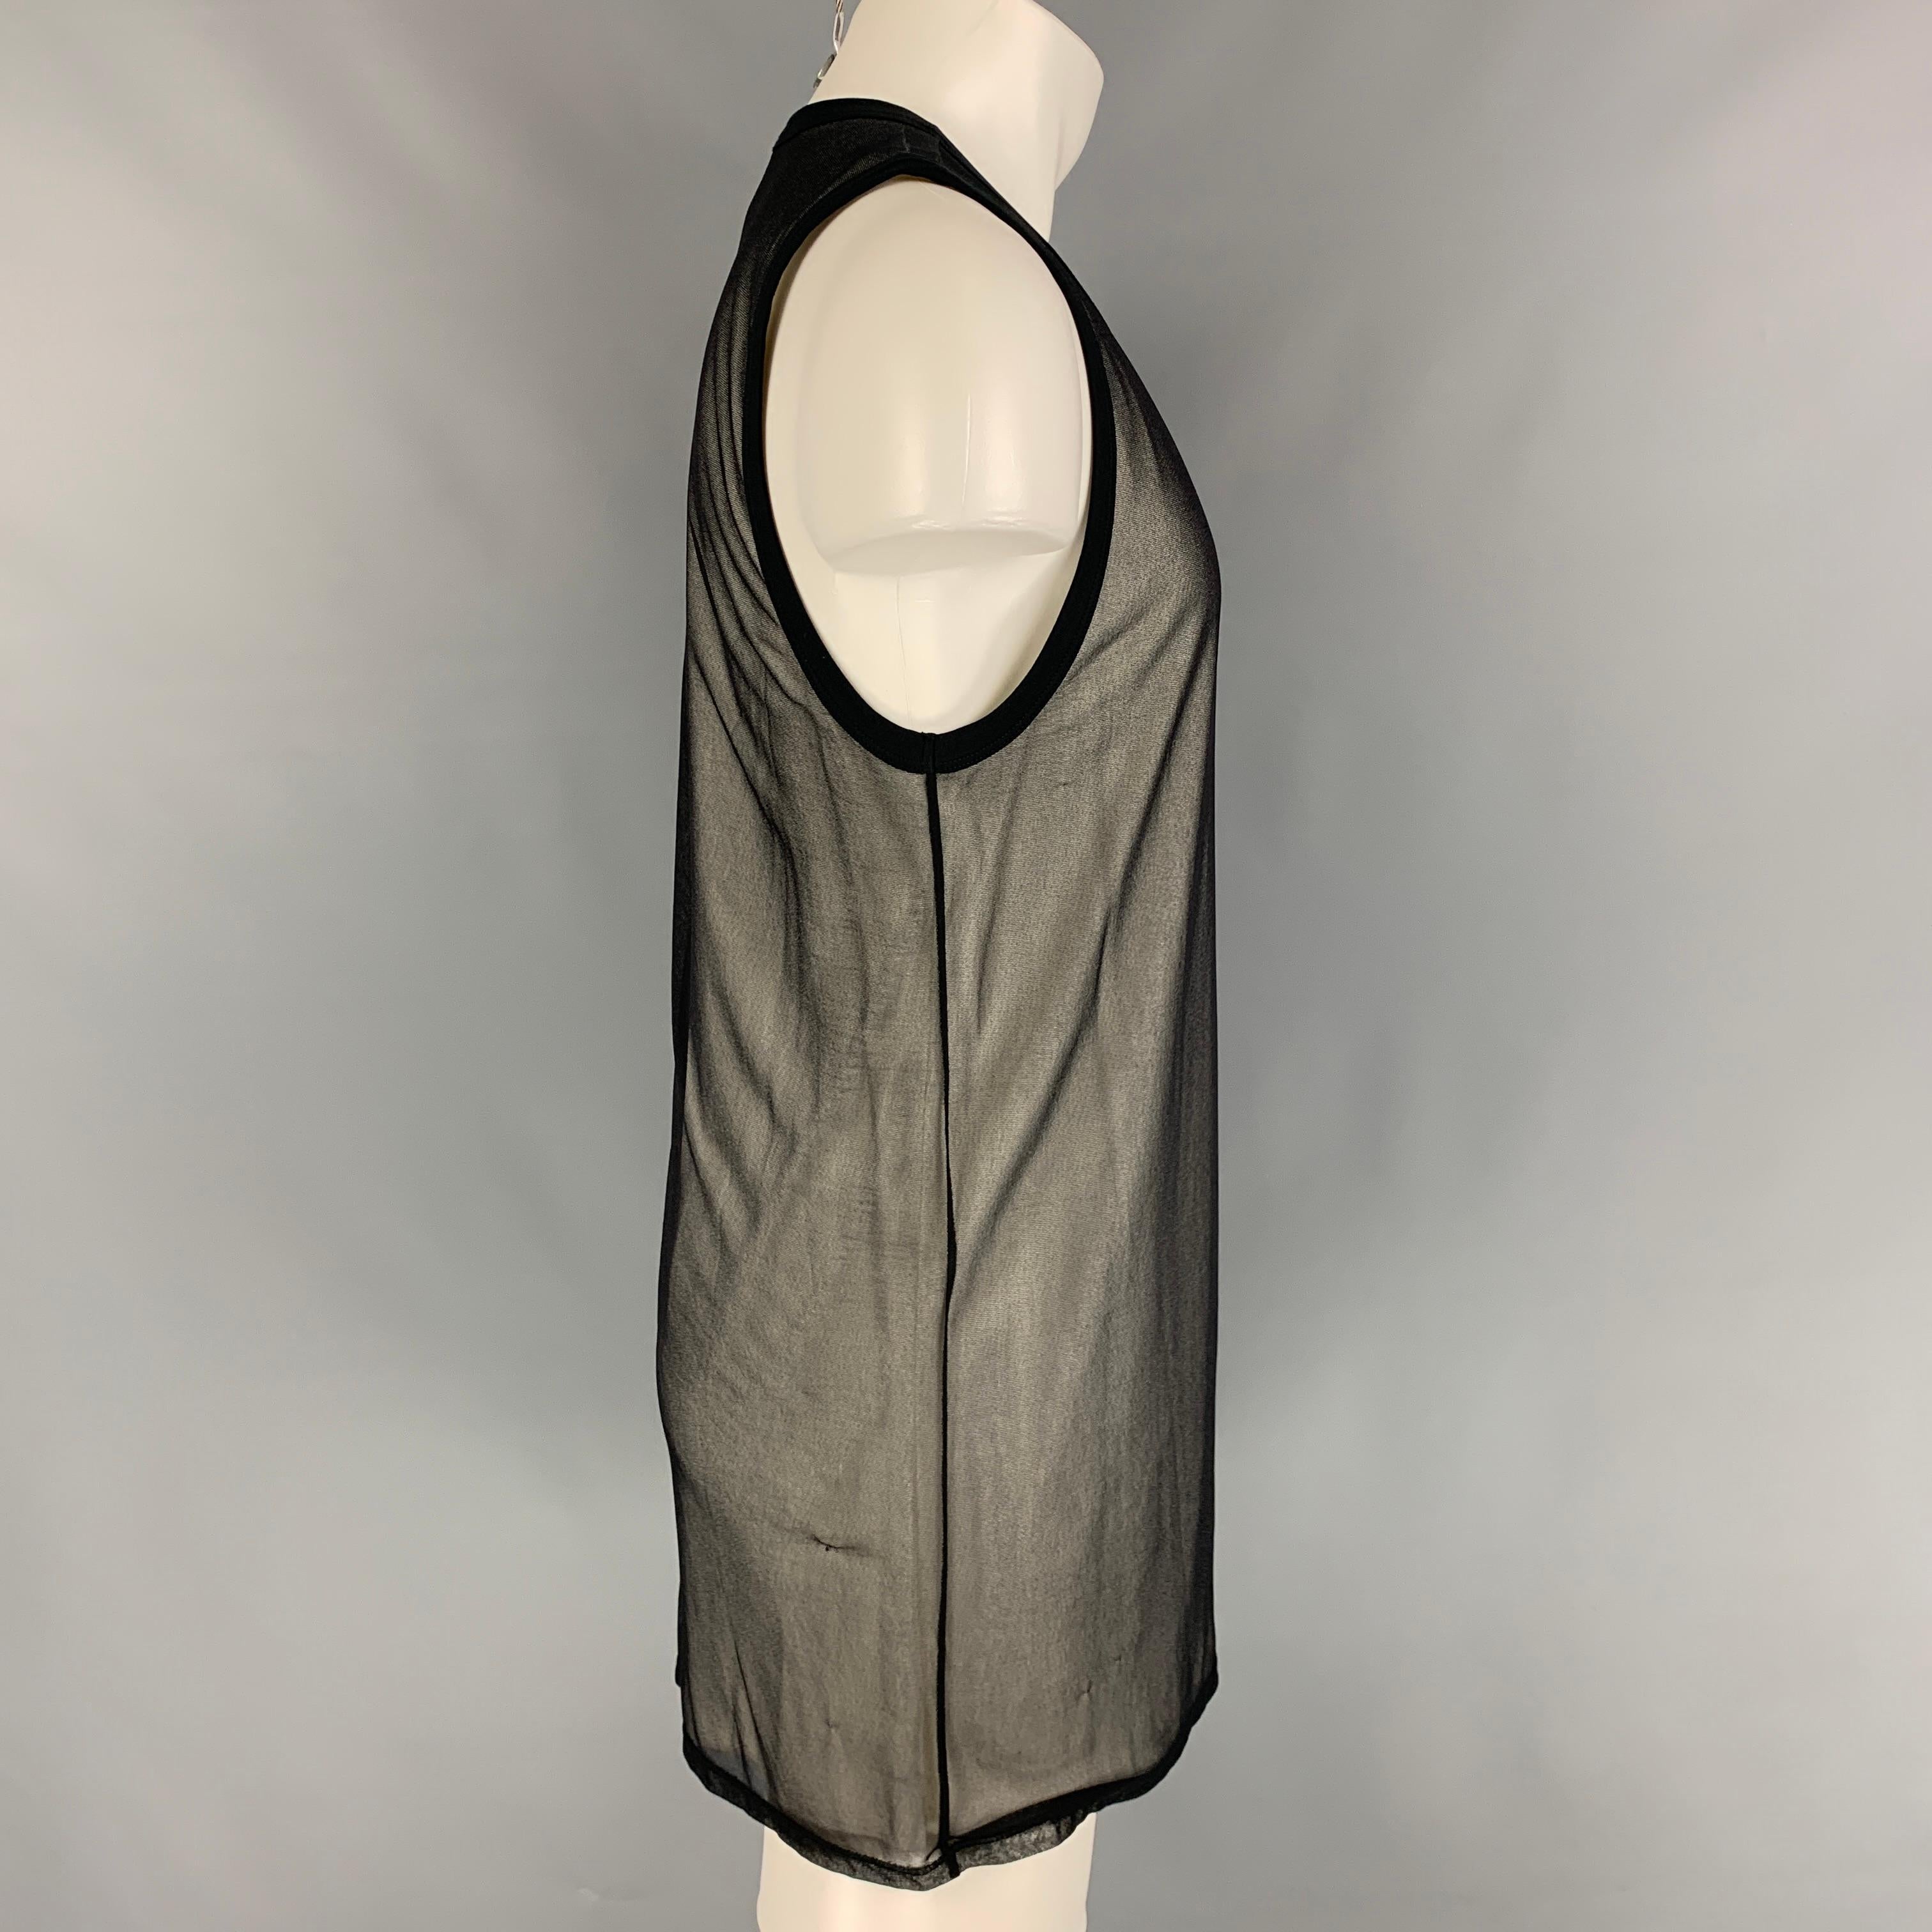 GARETH PUGH tank top comes in a black & white sheer cotton featuring a overlay style and a crew-neck. Made in Italy. 

Very Good Pre-Owned Condition.
Marked: 50

Measurements:

Shoulder: 15 in.
Chest: 38 in.
Length: 34 in. 